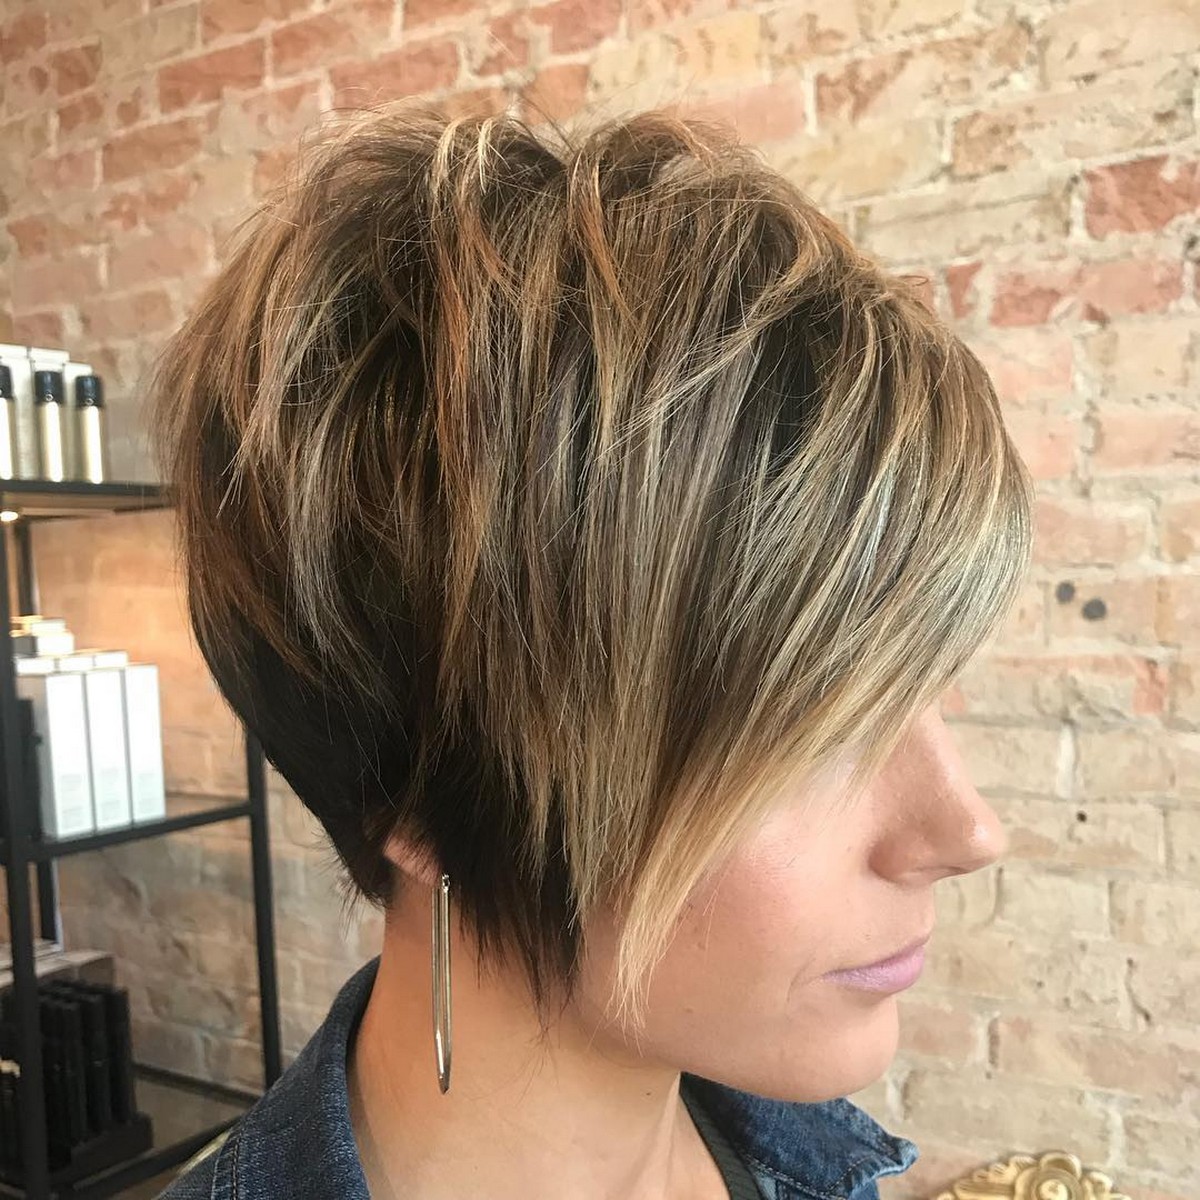 Long Tapered Pixie With Messy Crown